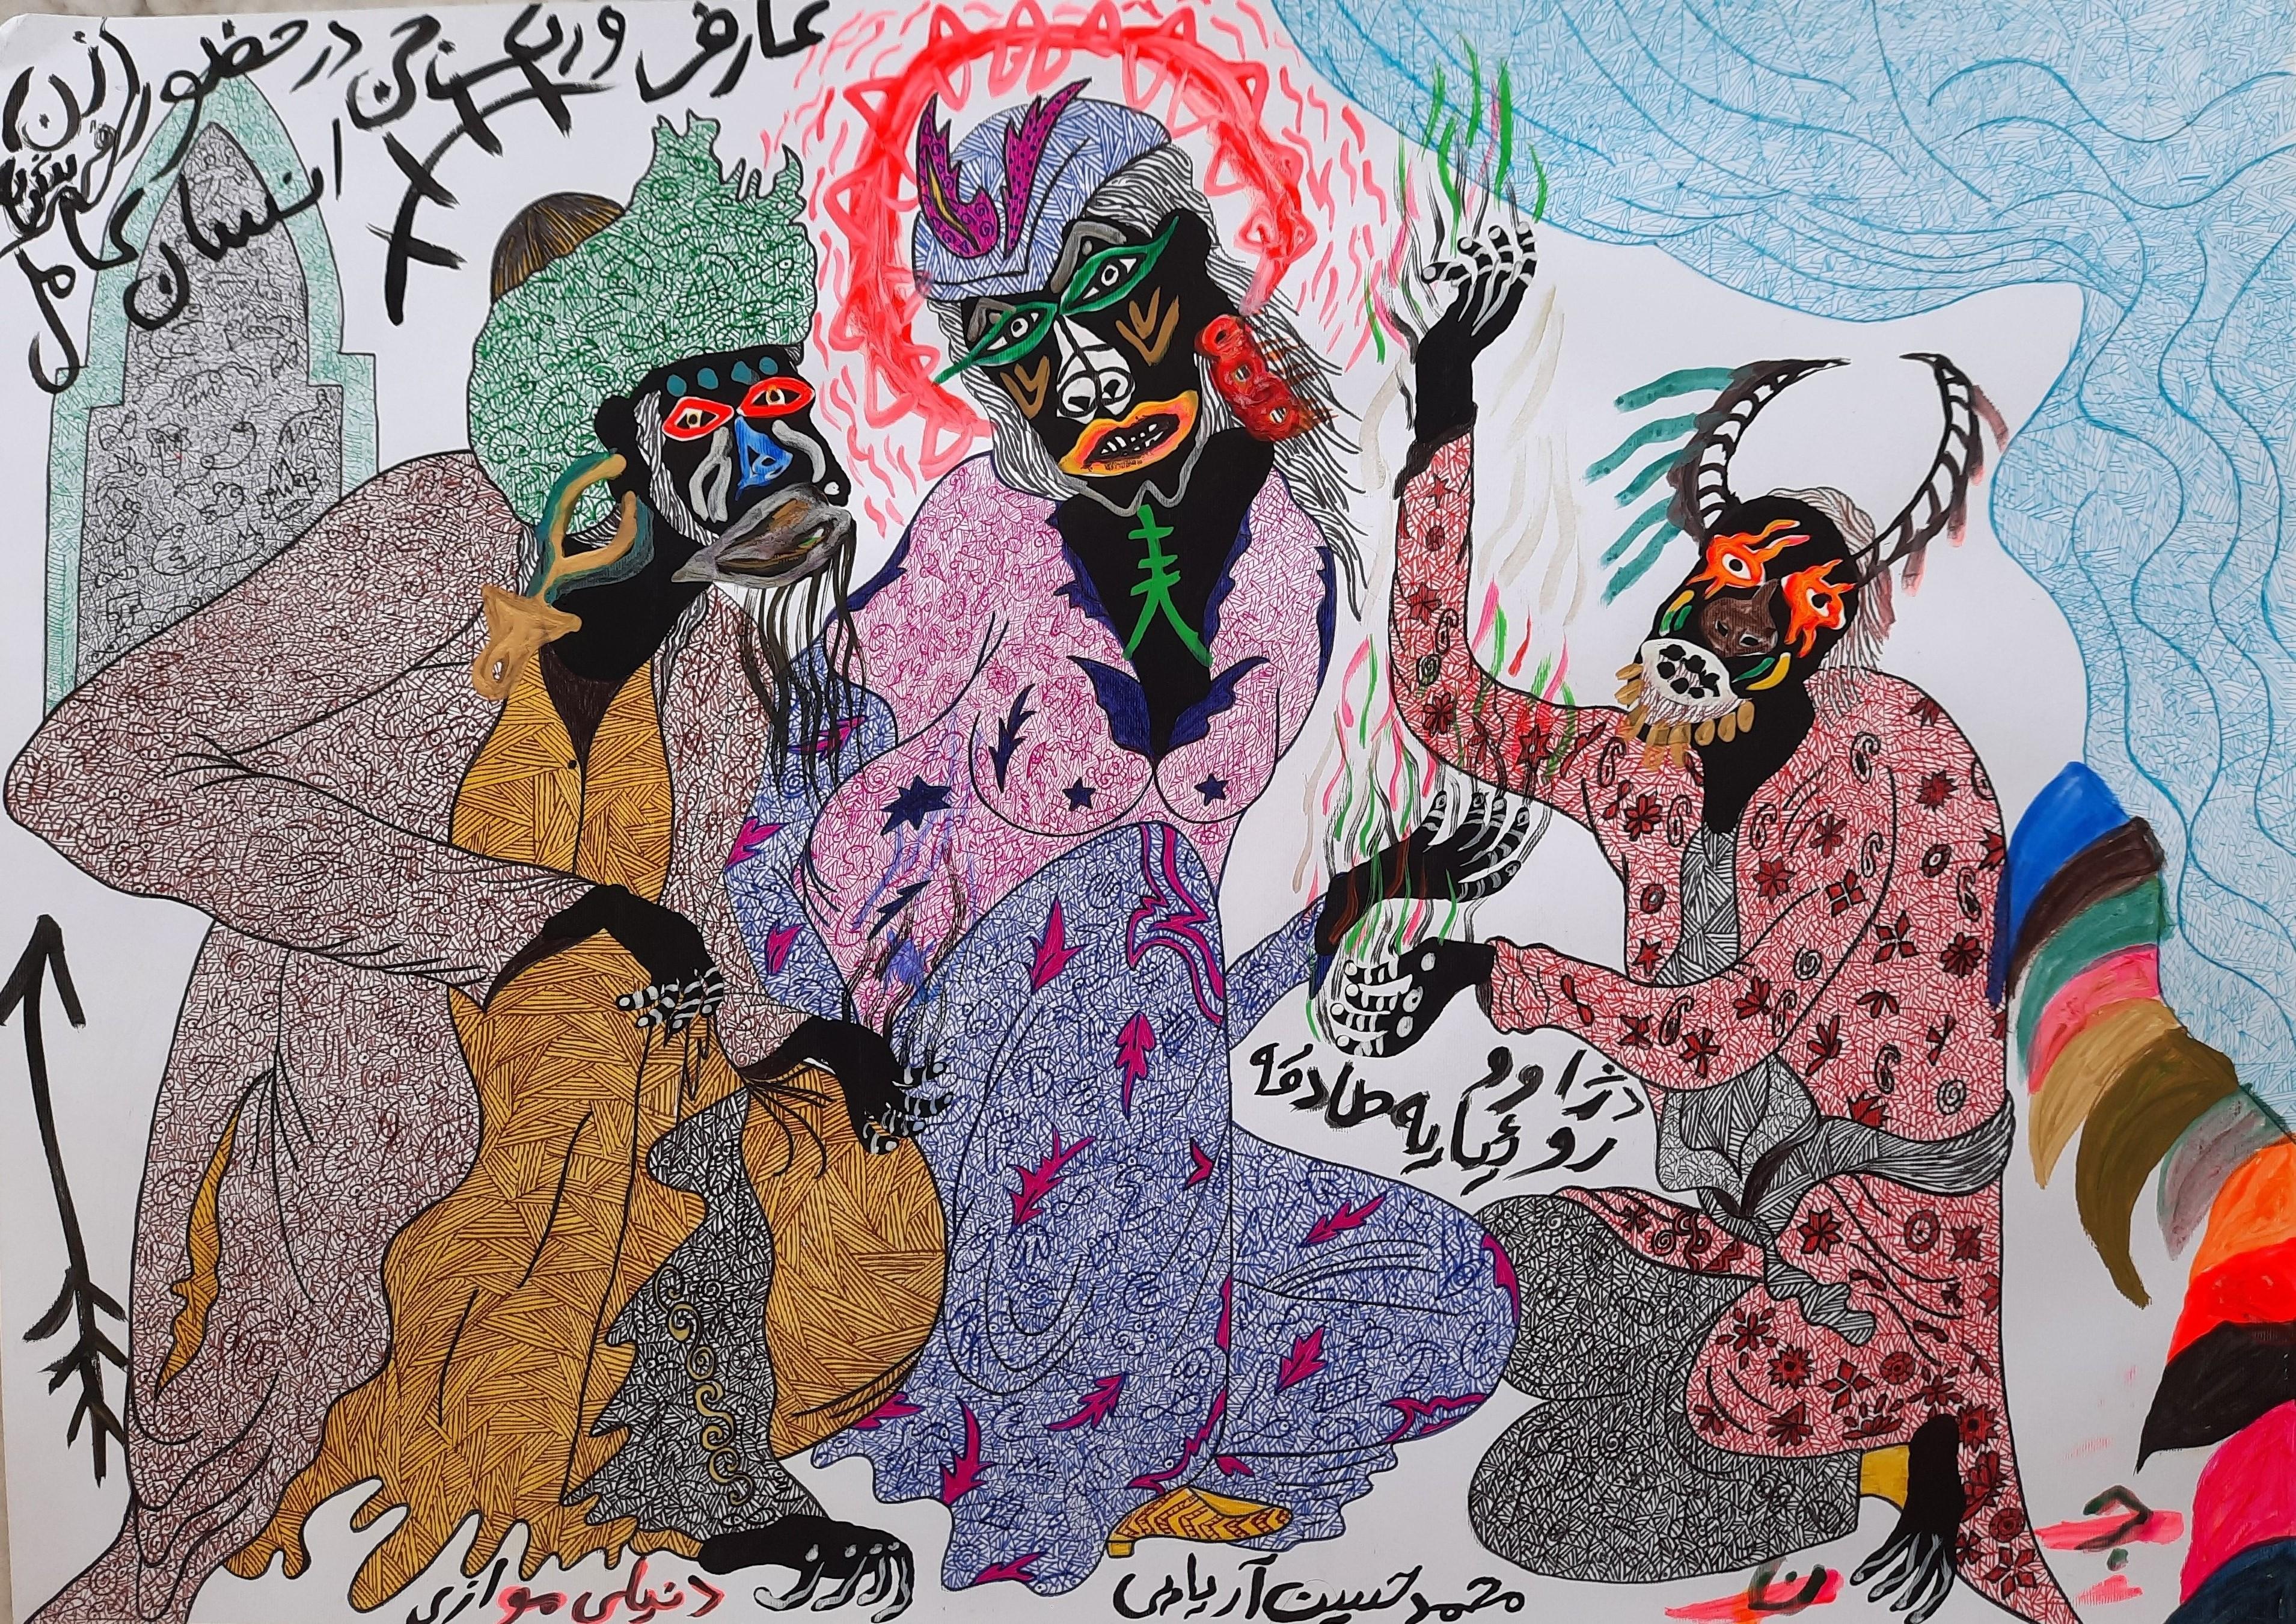 Acrylic paint on paper
Hand-signed by the artist
Unique work

THE THOUSAND AND ONE NIGHTS OF MOHAMMAD ARIYAEI

" Gentleness and oriental wisdom follow the supercharged bubbling to which we were accustomed from the previous deliberately art brut